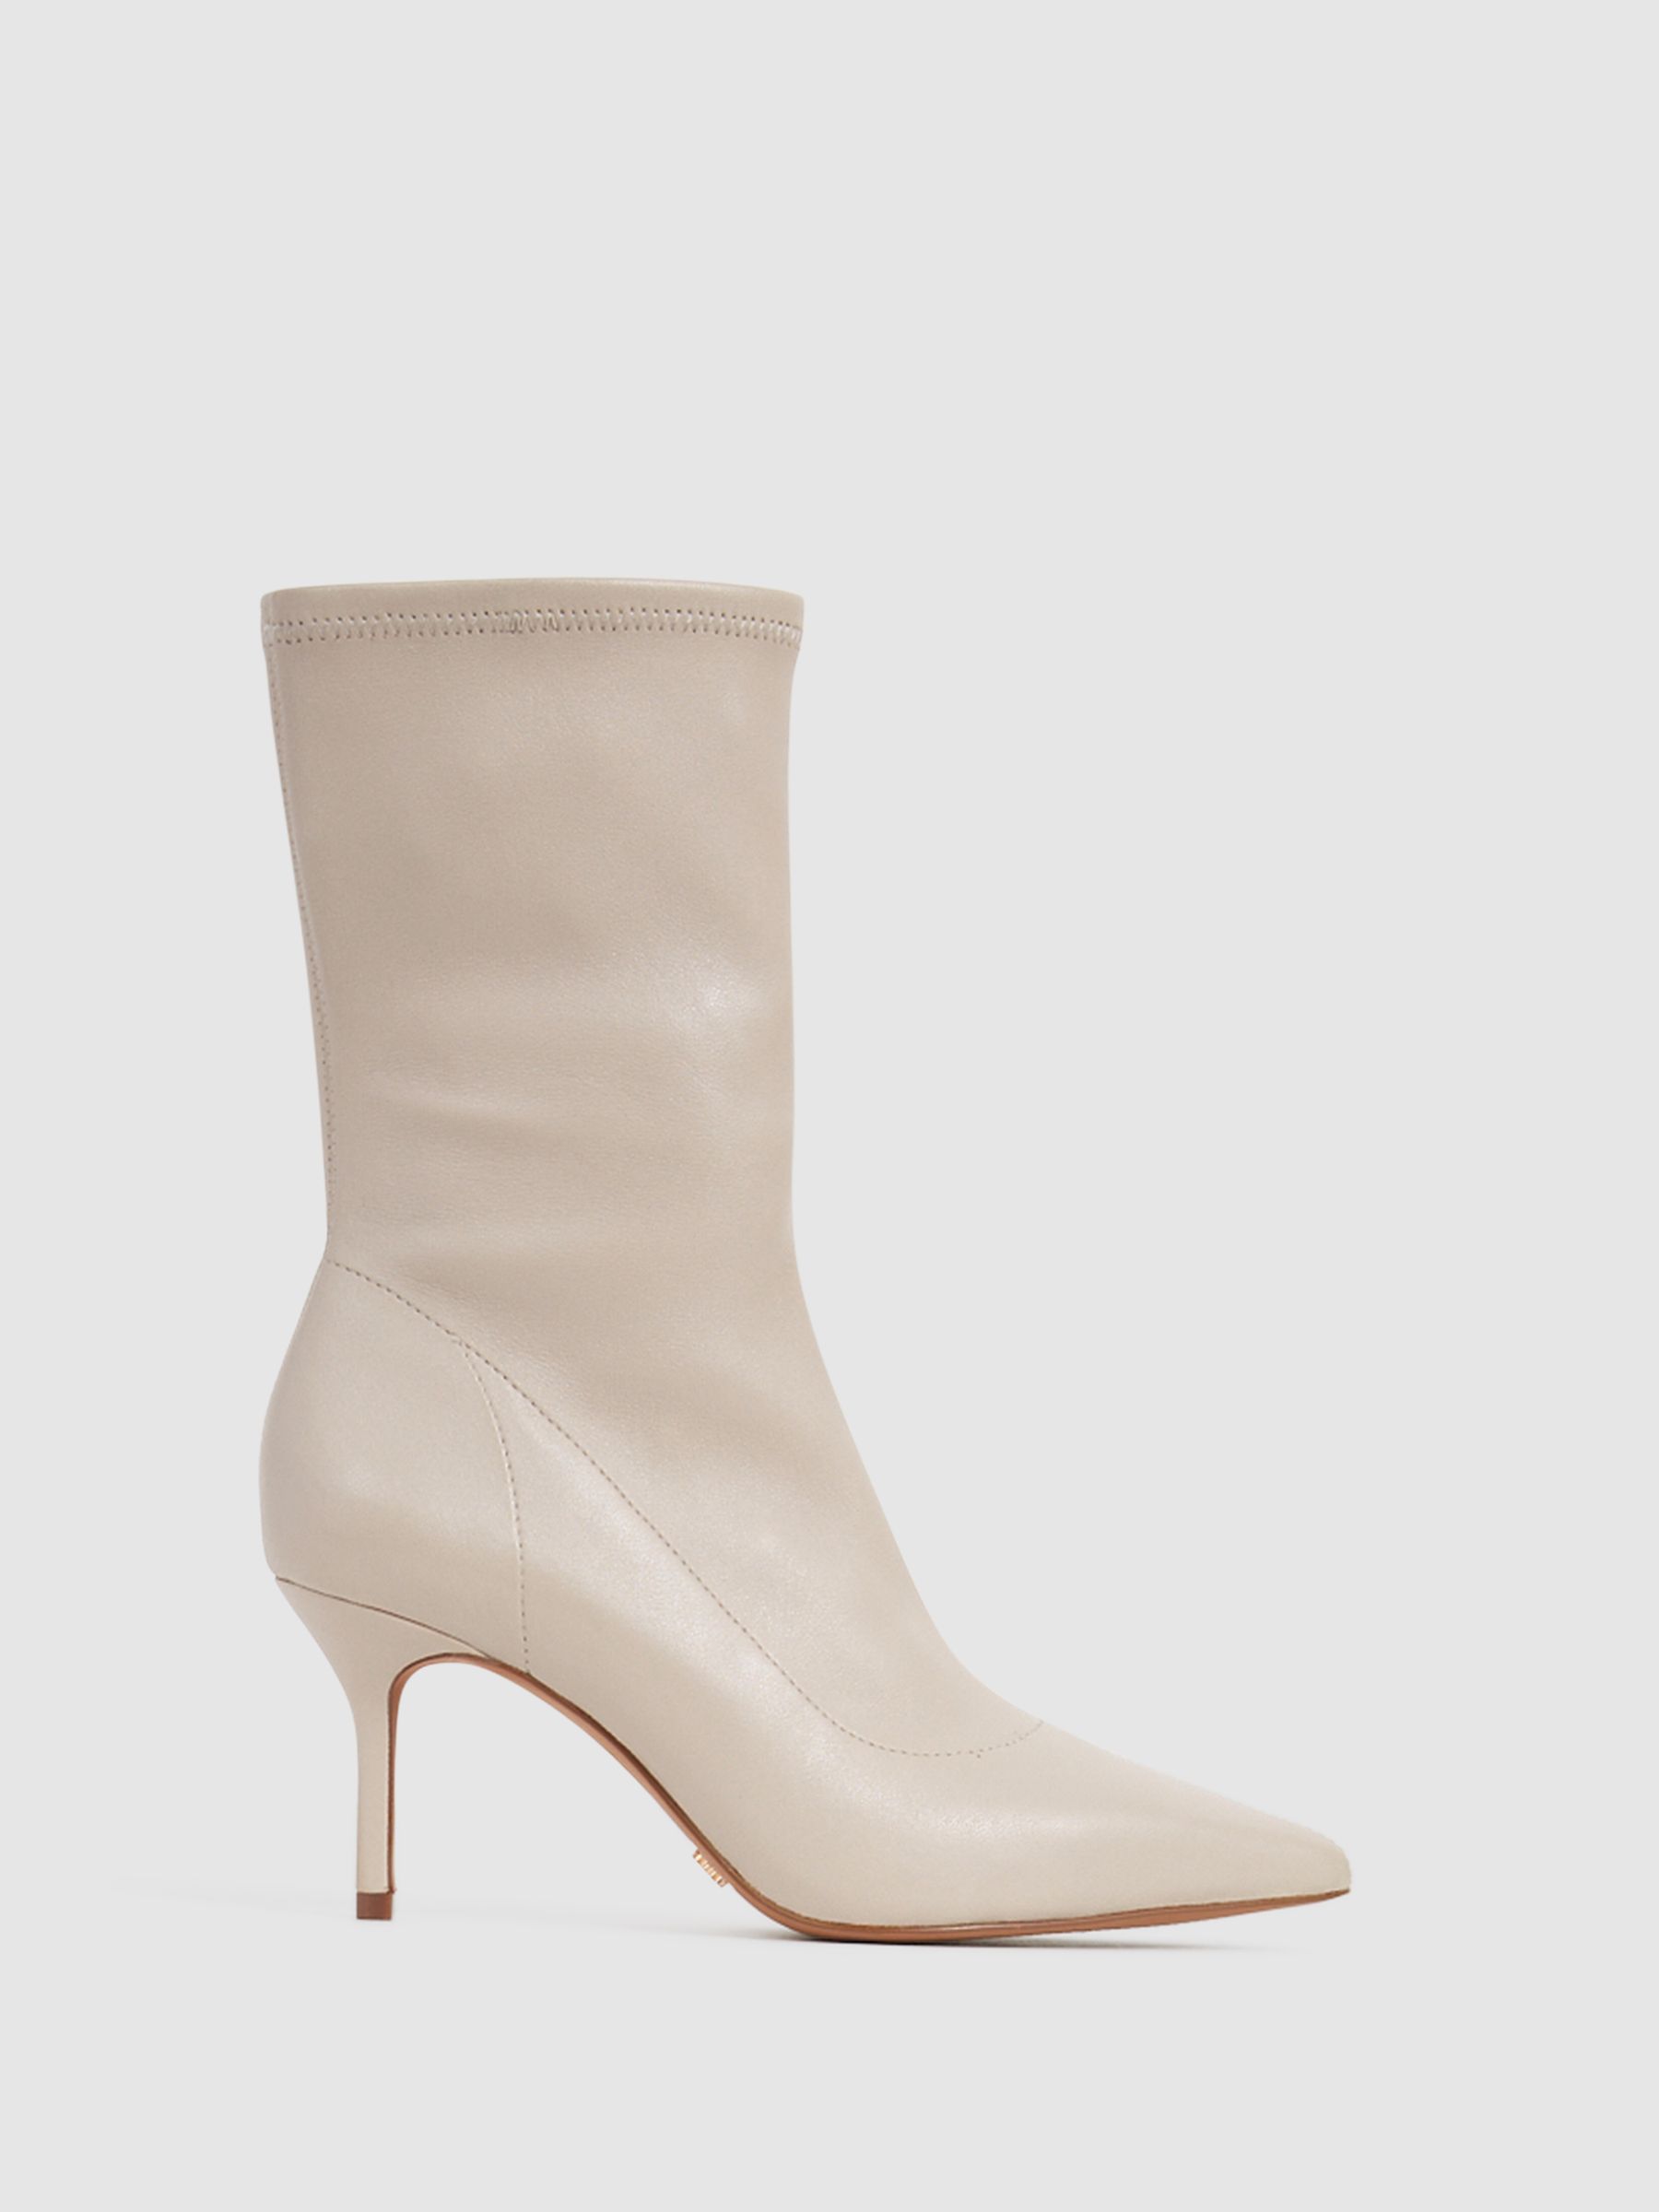 Reiss Caley Pointed Kitten Heel Leather Boots | REISS USA